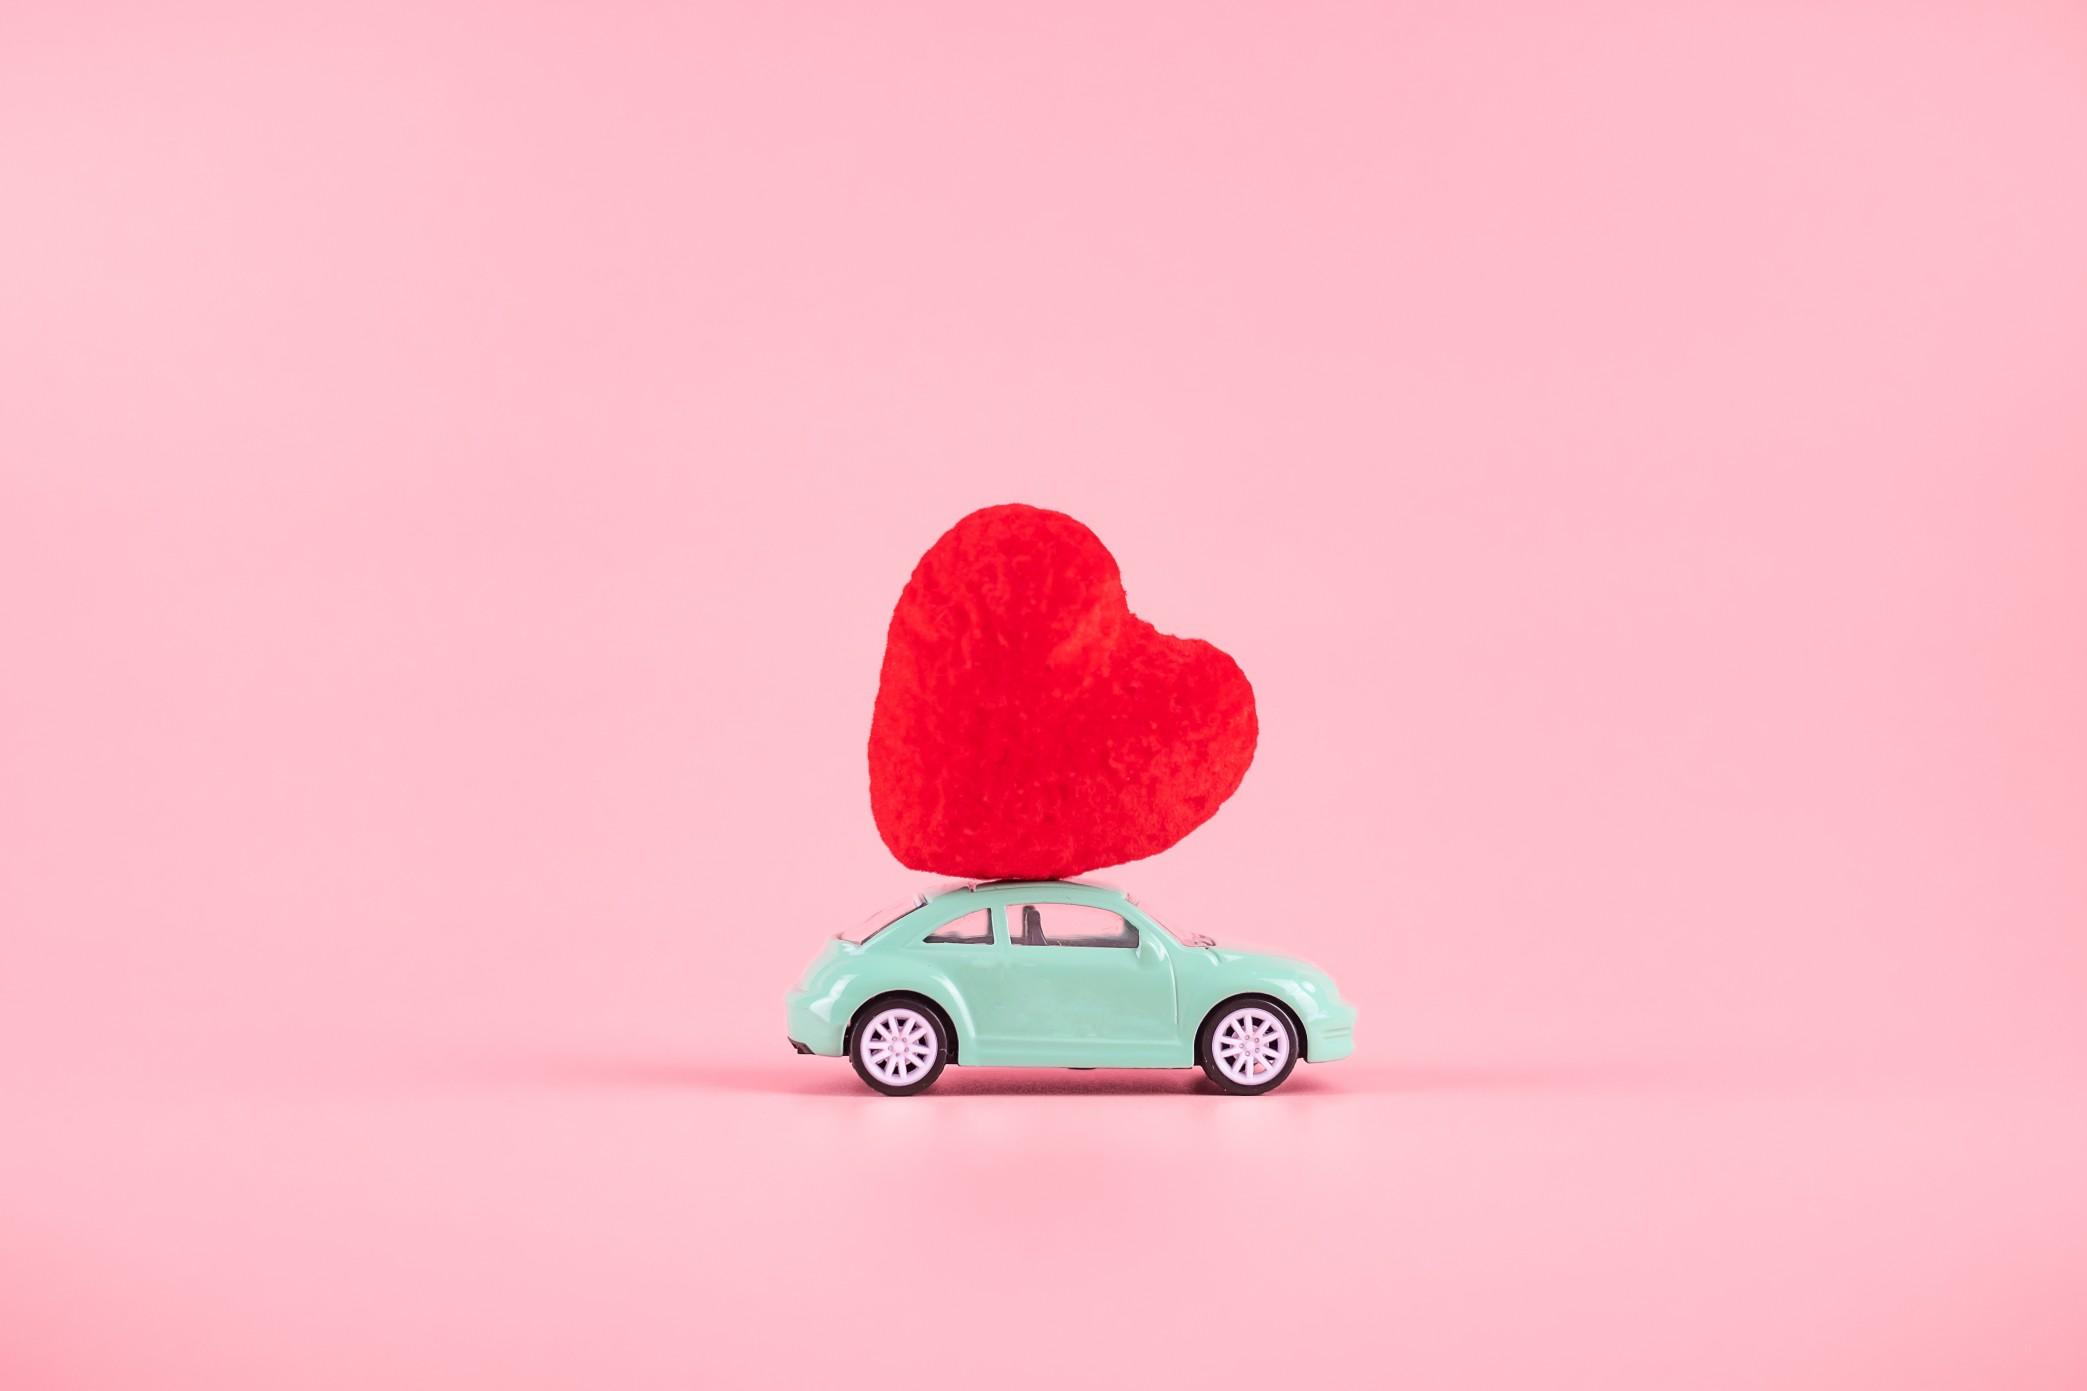 red heart on a teal car toy with a pink background